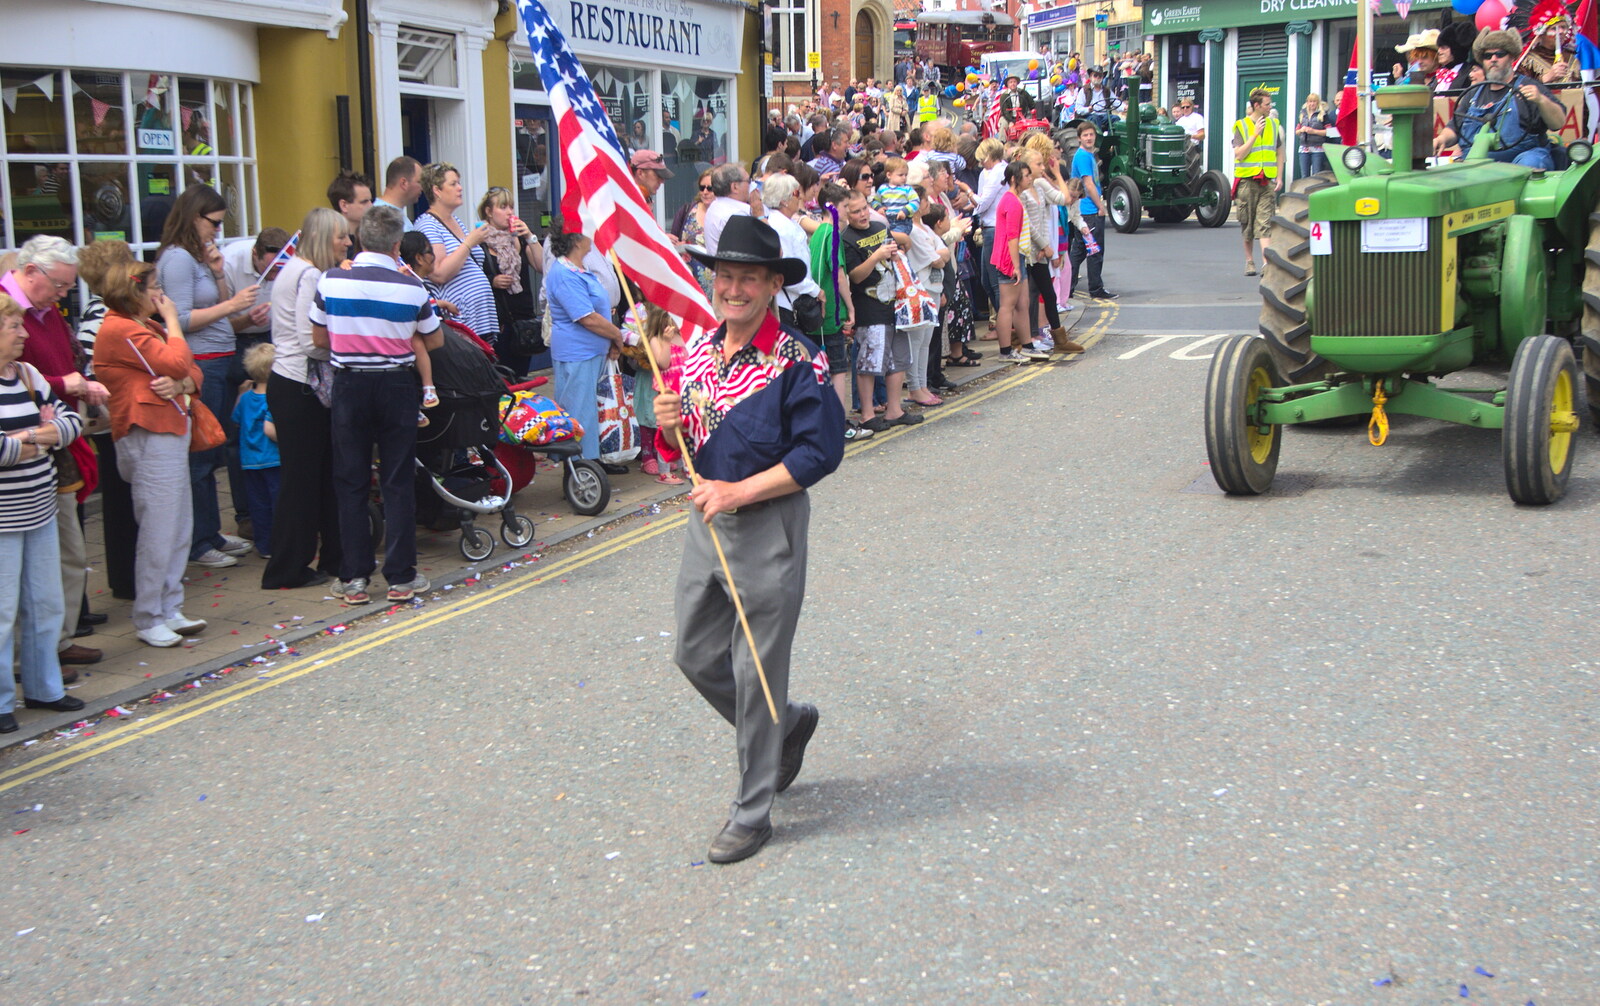 A dude with an American flag from Morris Dancing and a Carnival Procession, Diss, Norfolk - 17th June 2012